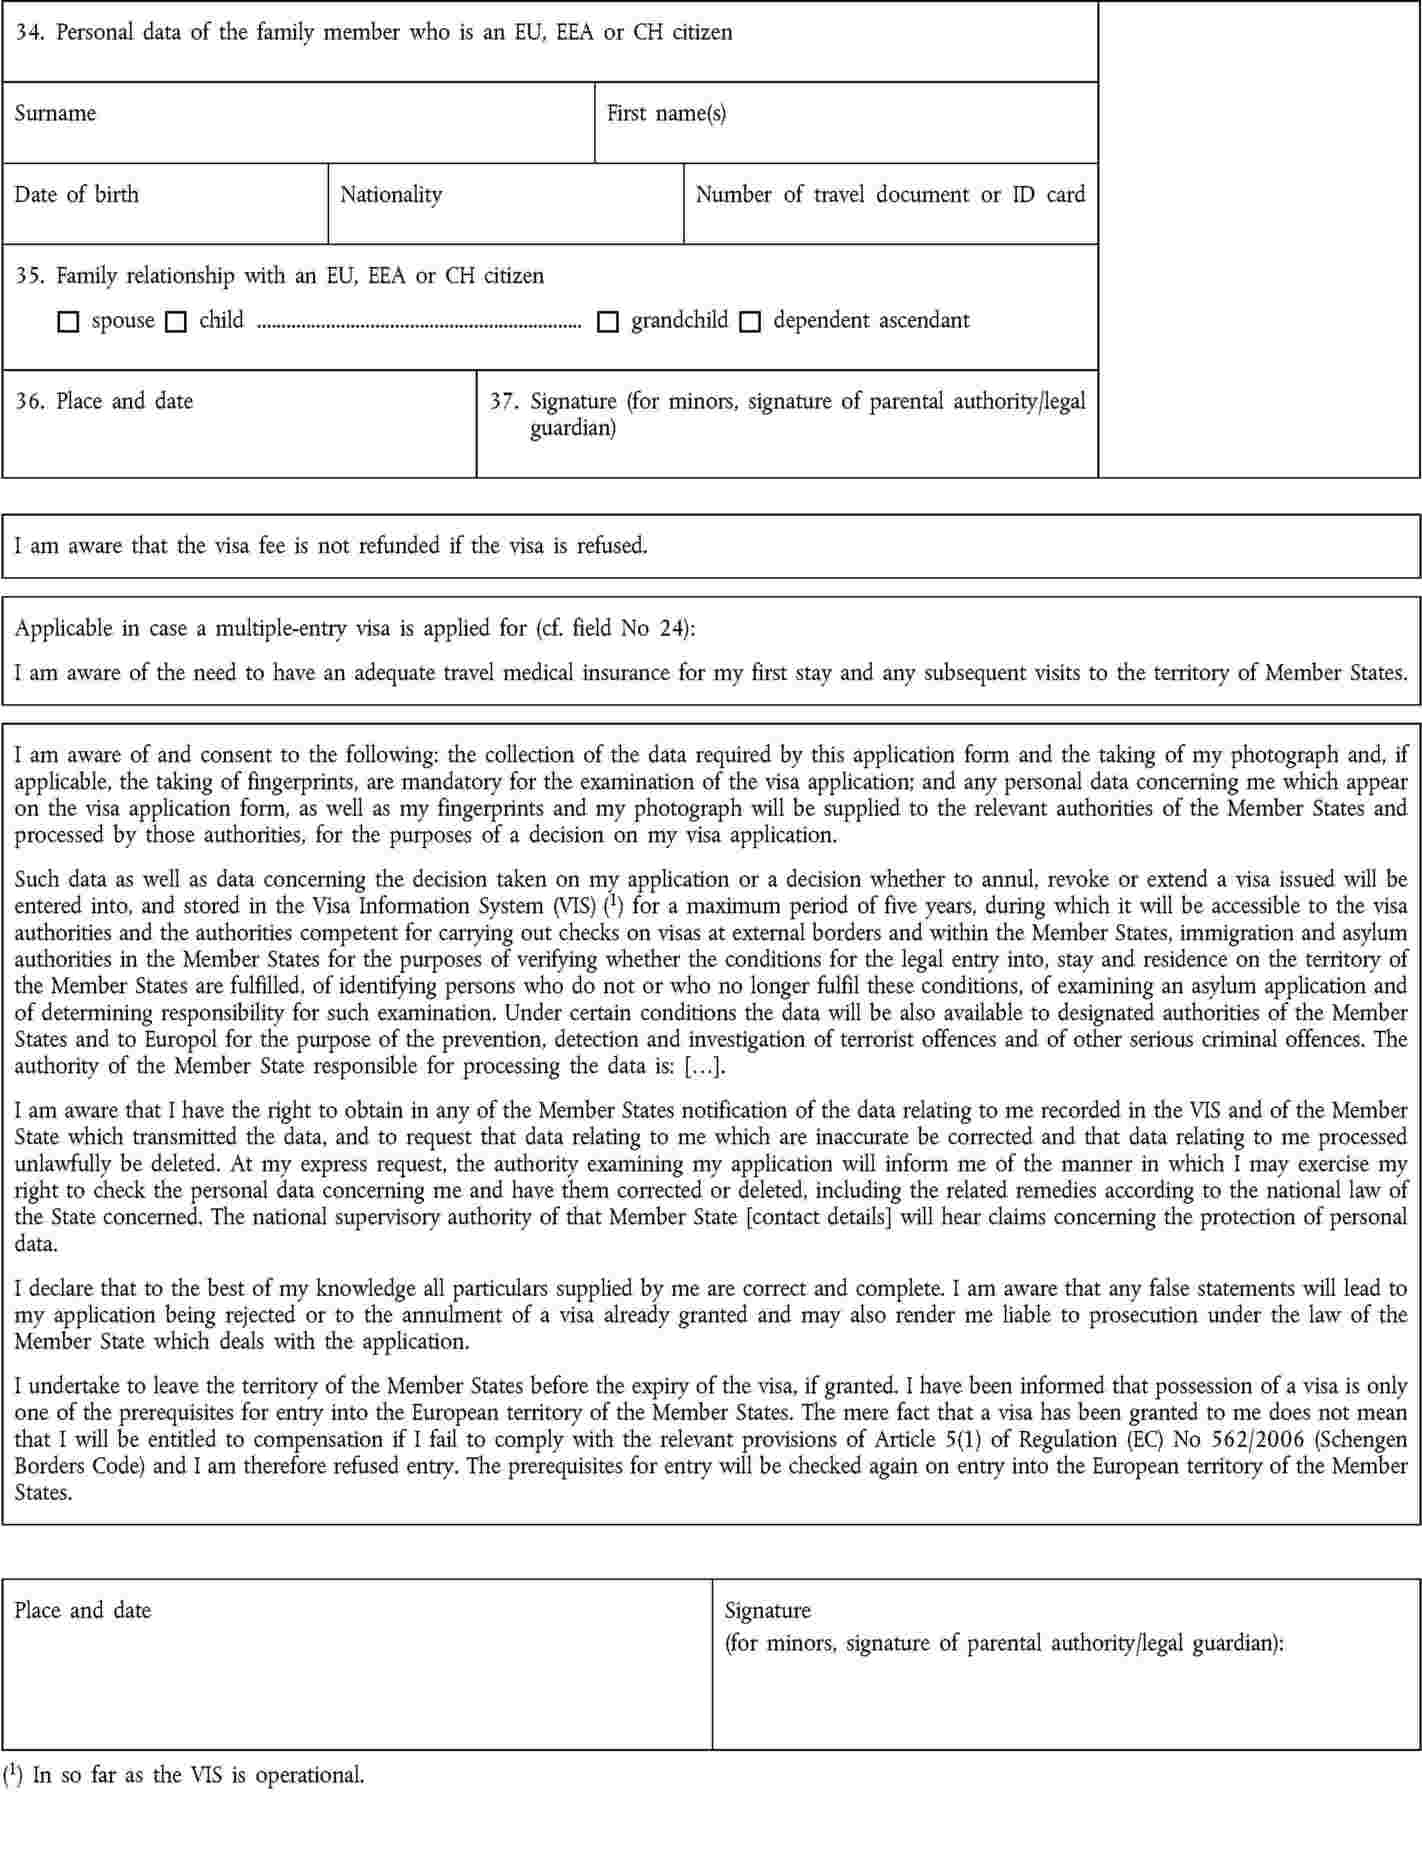 Guardianship Letter In Case Of Death Template Examples Letter